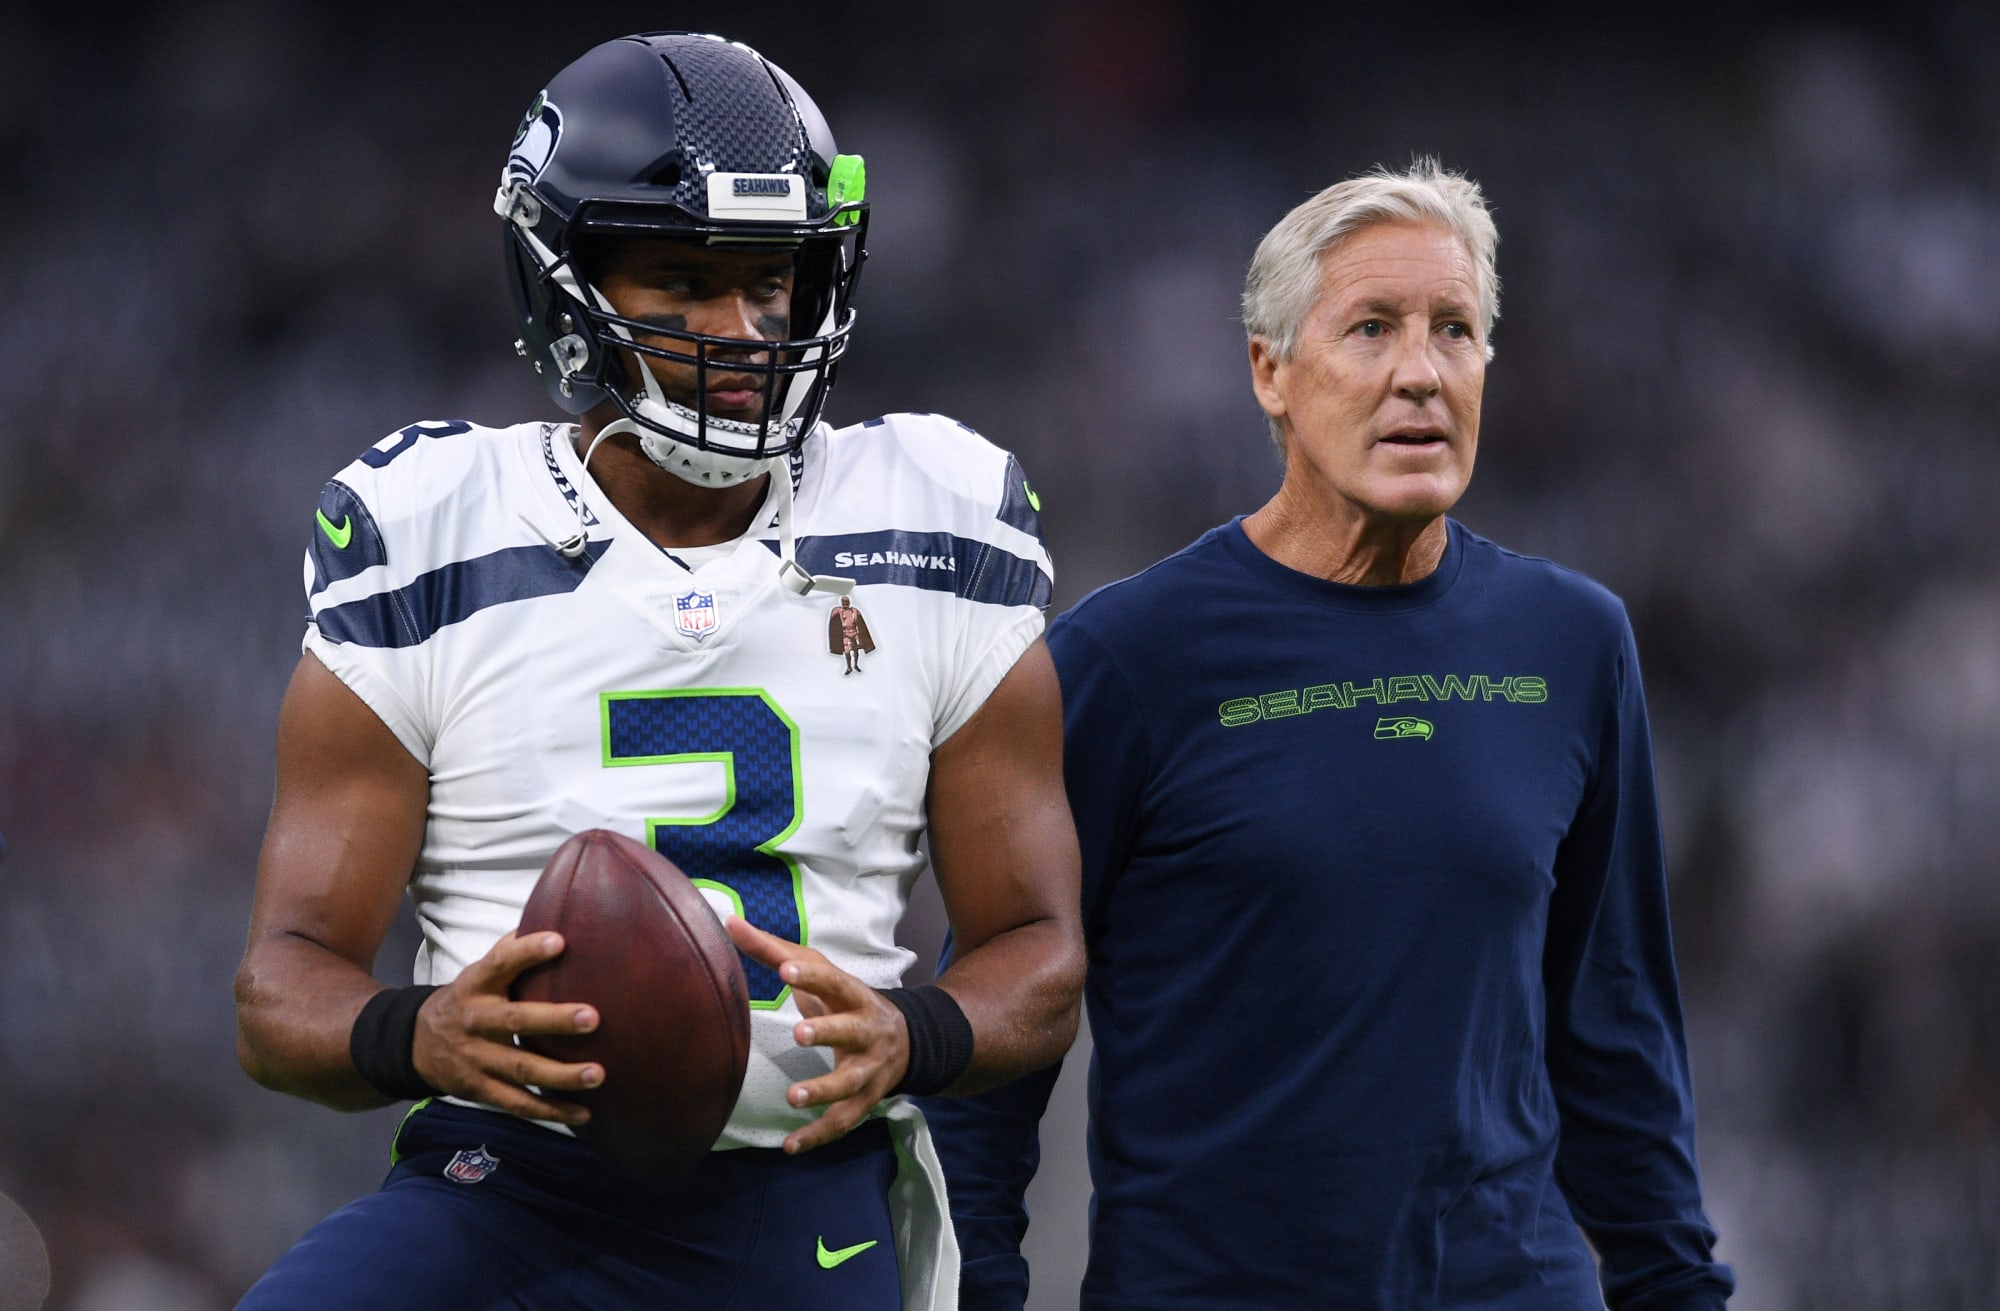 Seahawks: Russell Wilson seems pretty annoyed with Pete Carroll’s comment - FanSided